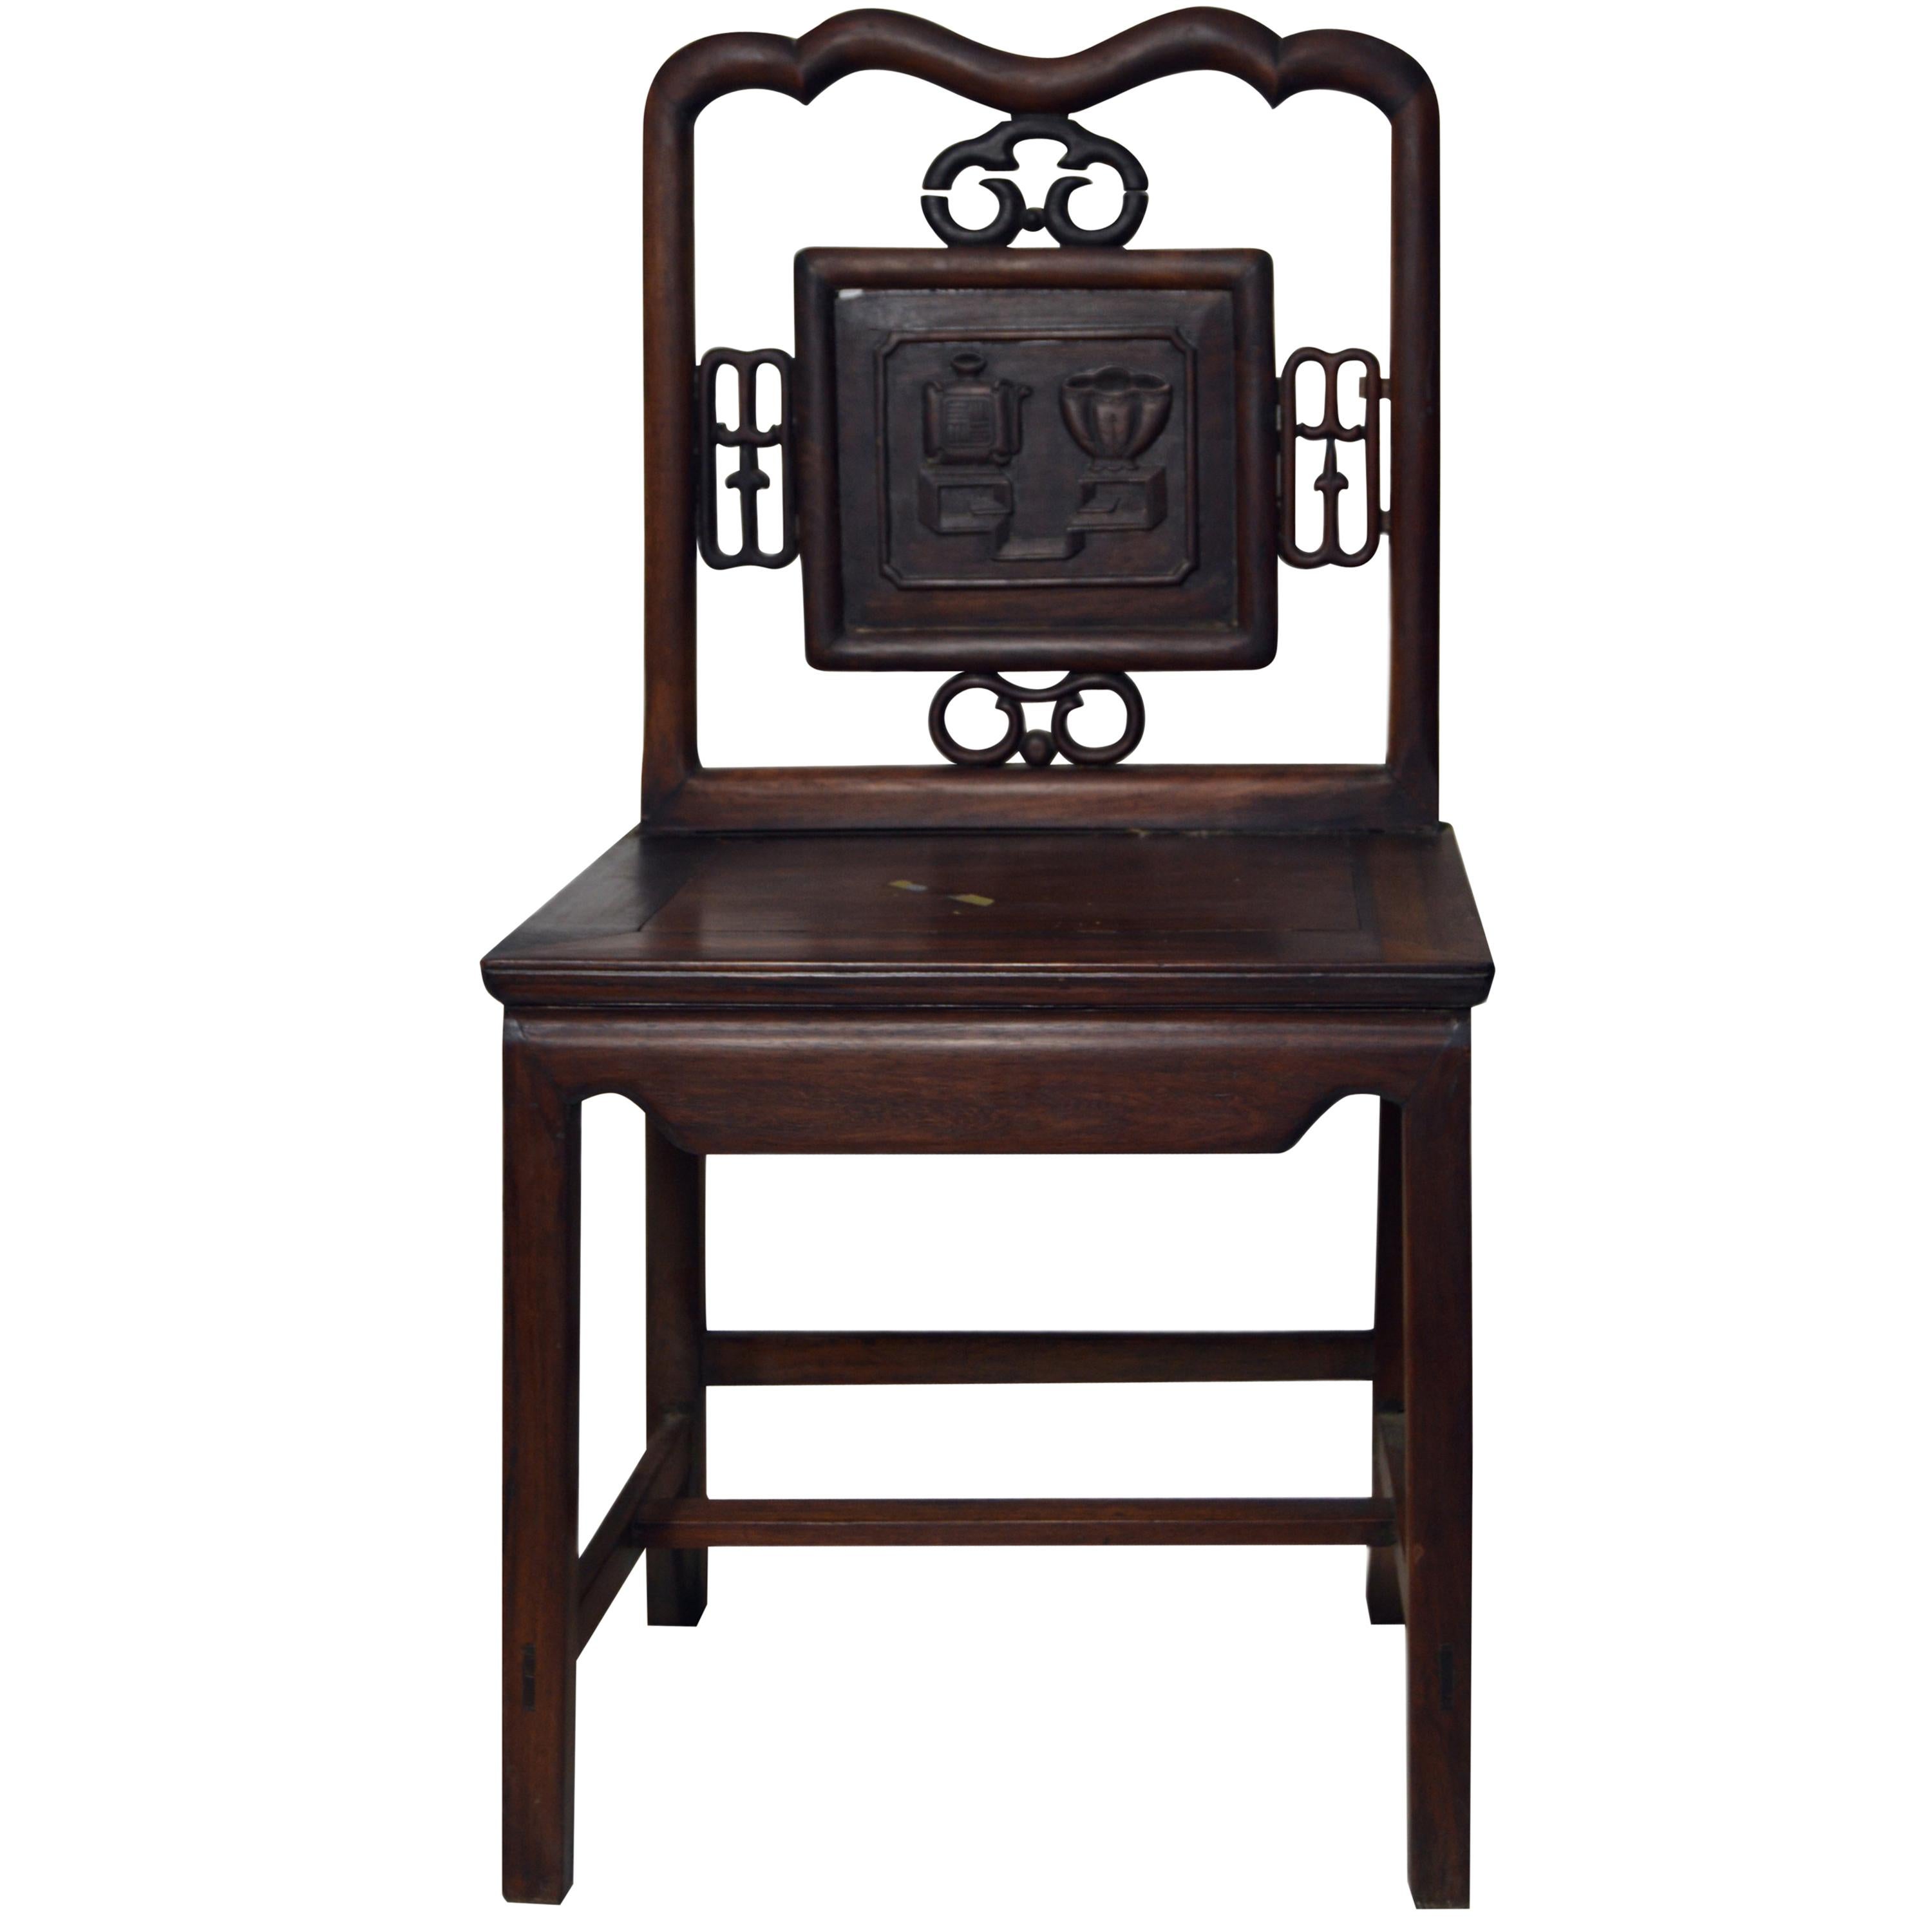 Yumu Wood Chinese 19th Century Chair with Hand-Carved Décor and Lacquered Finish